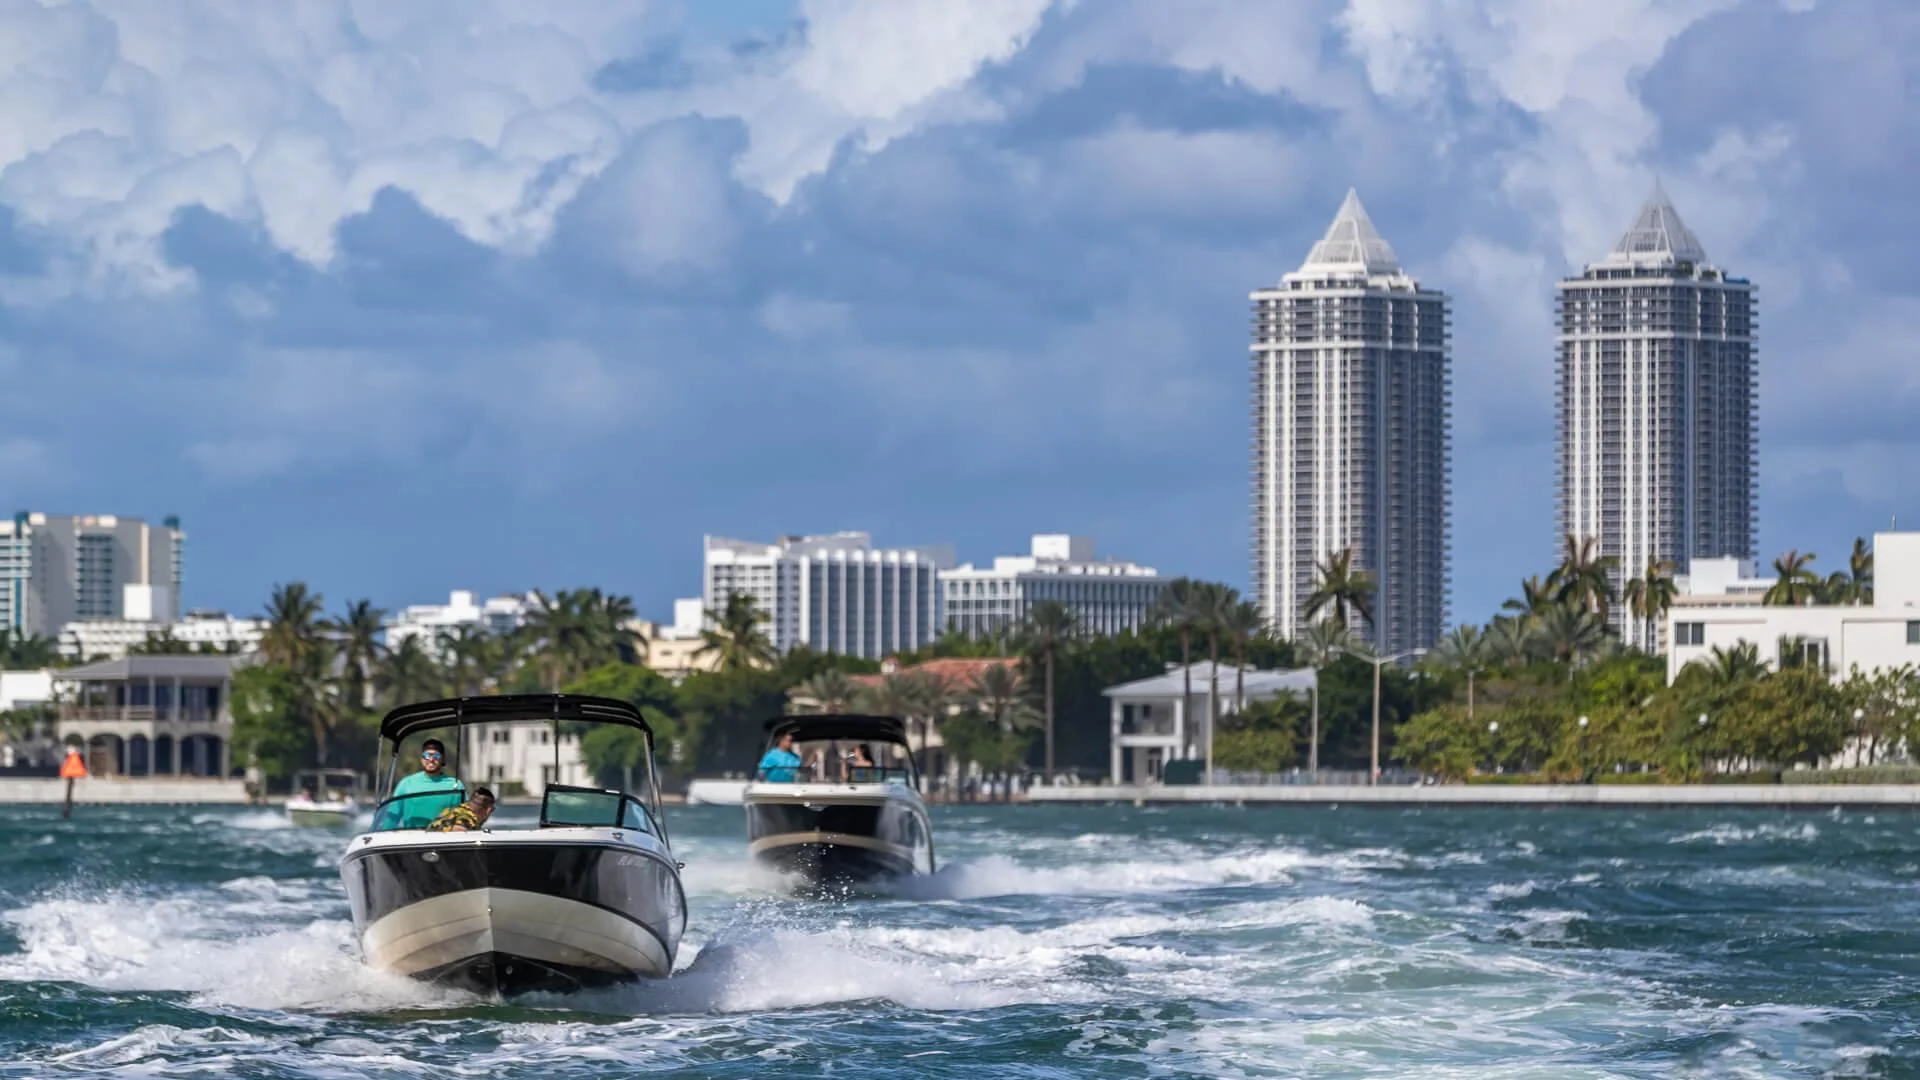 Aquarius Boat Rental, Premier Boat Charters In Miami - Tailored Experiences On The Water